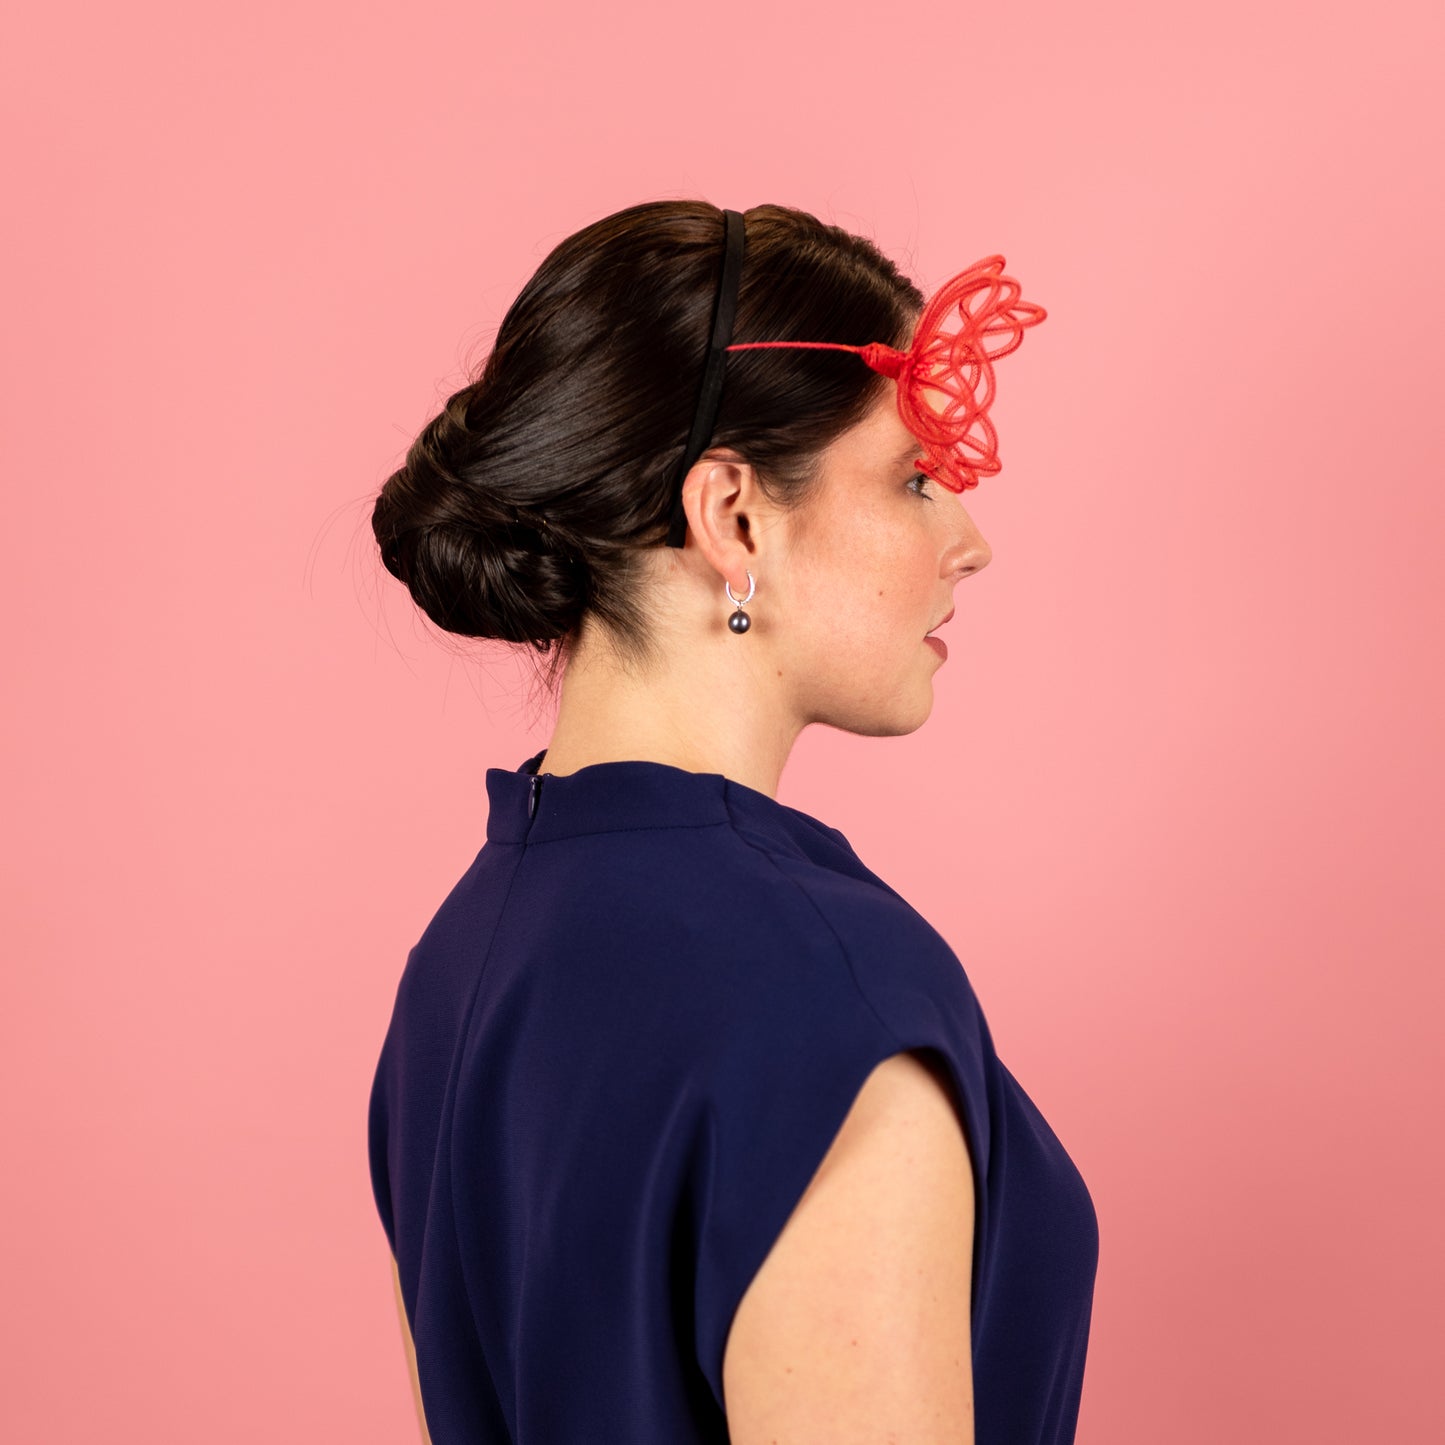 Kimberly Headband with Floating Wire Peony Flower in Red